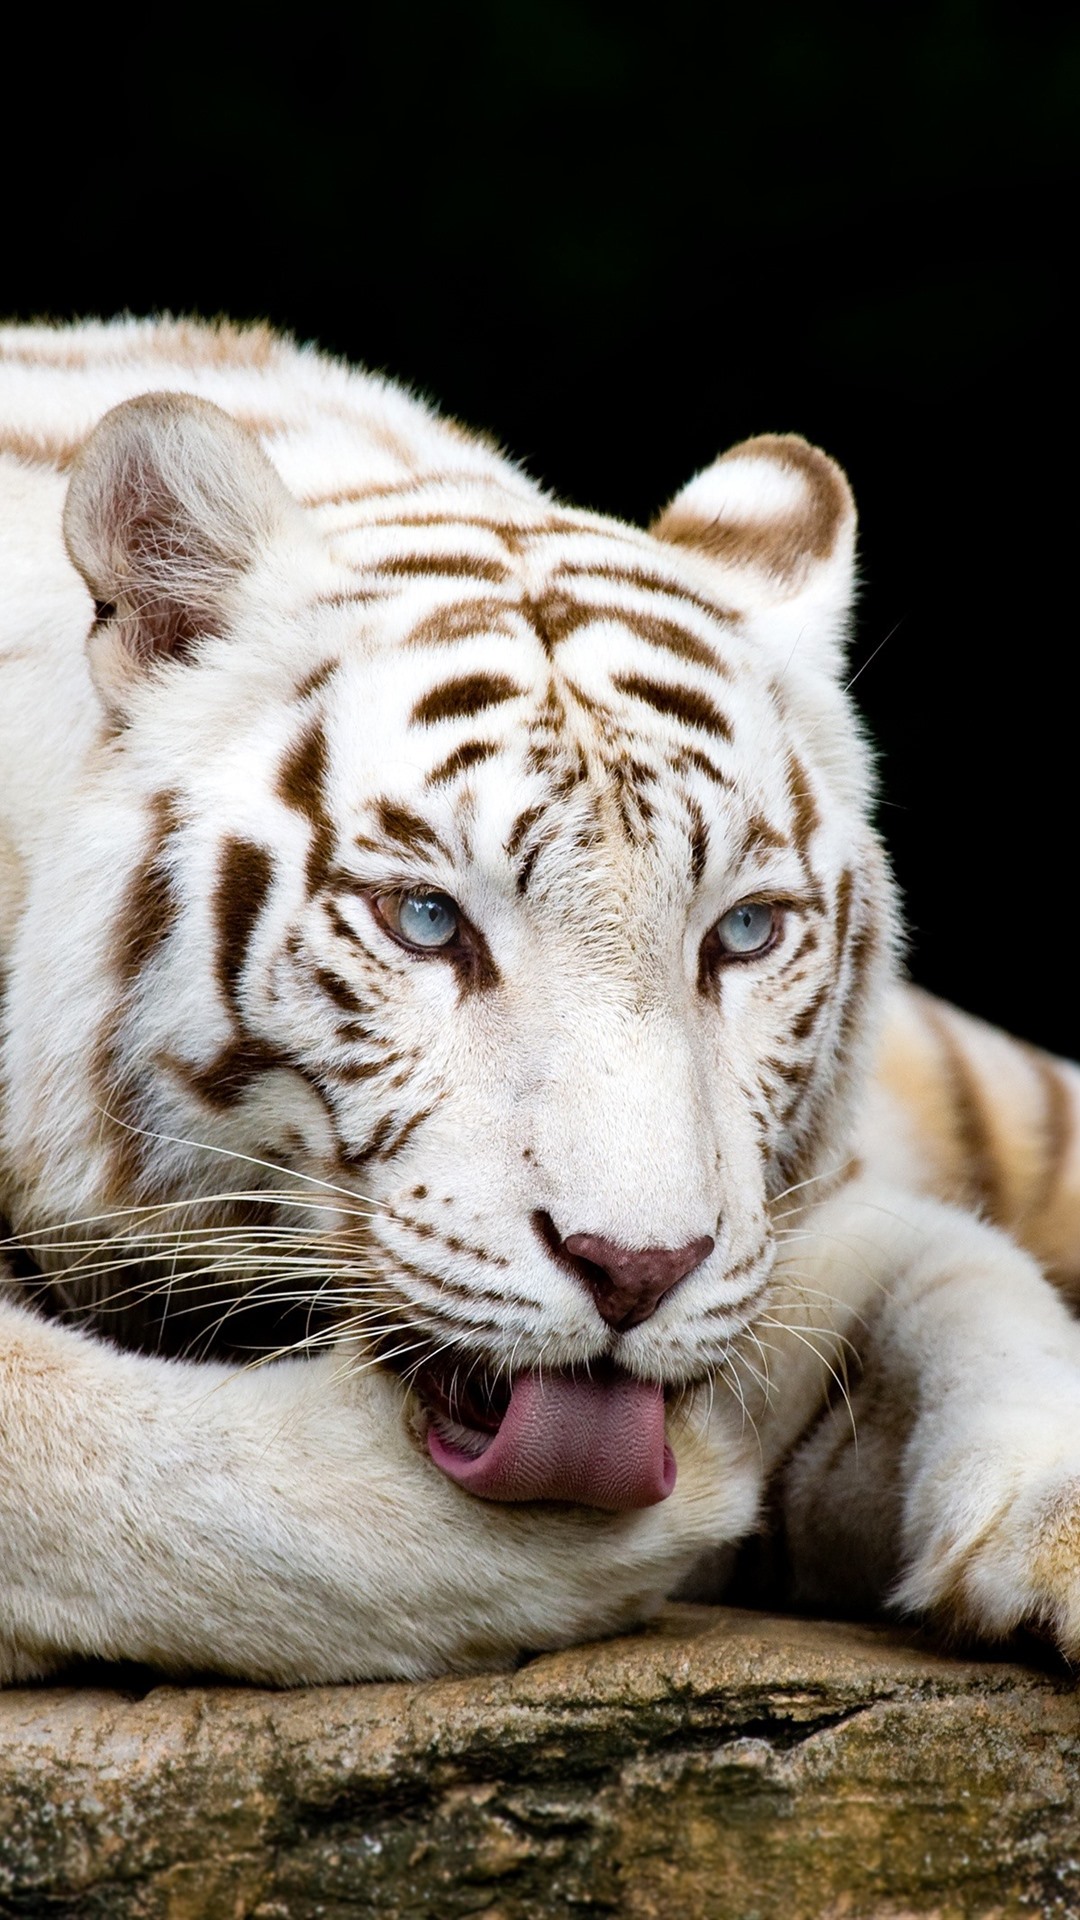 Iphone Wallpaper White Tiger, Rest, Head, Paws - Singapore Zoo - HD Wallpaper 